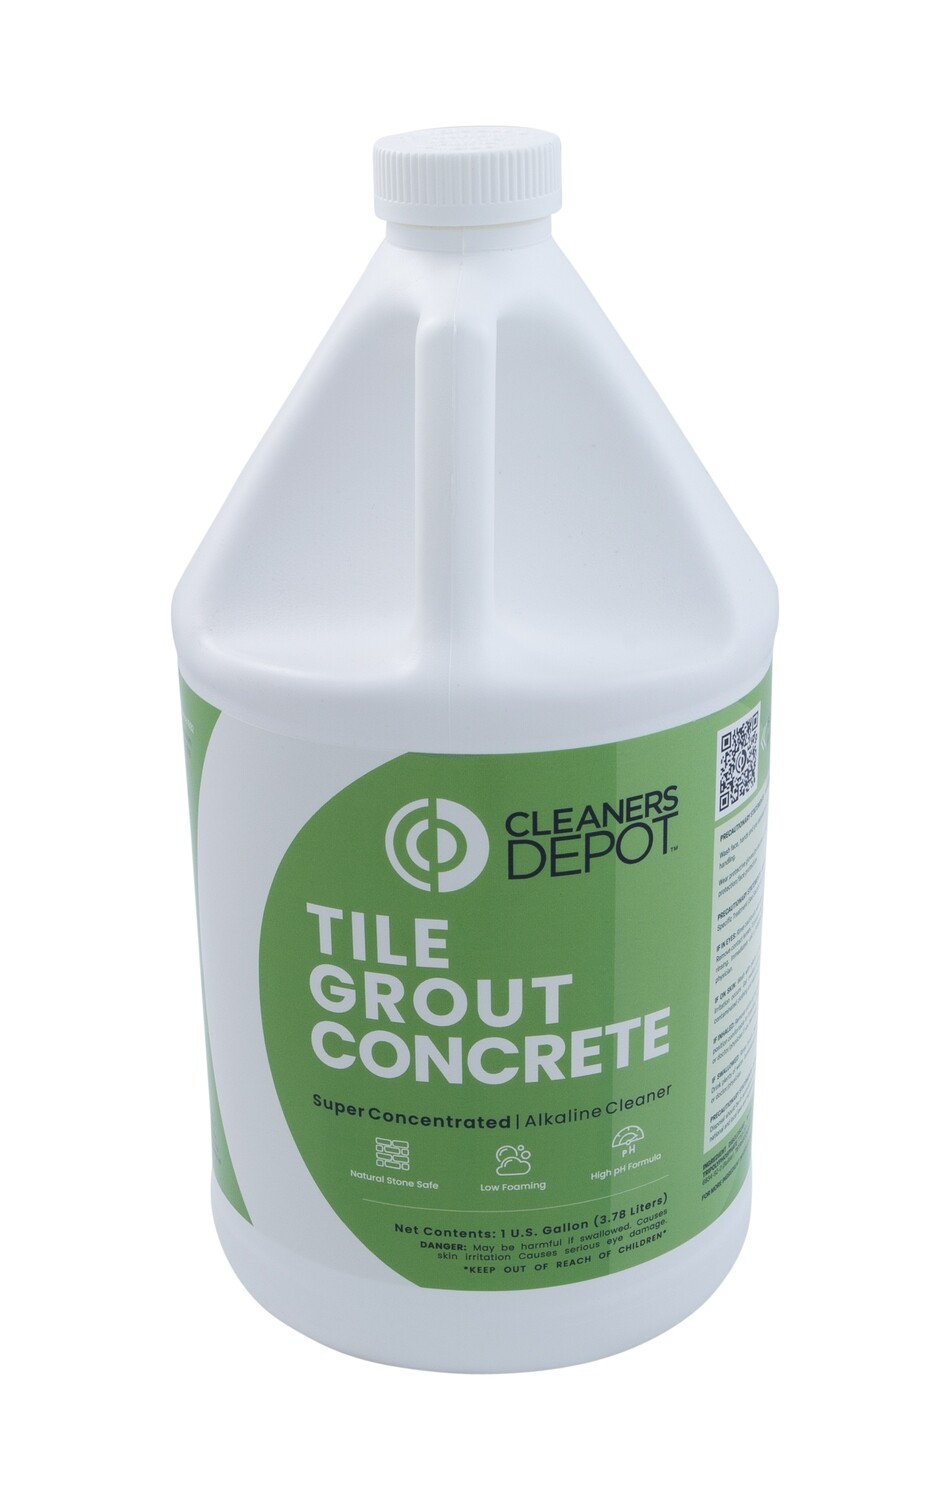 Tile Grout Concrete by Cleaners Depot